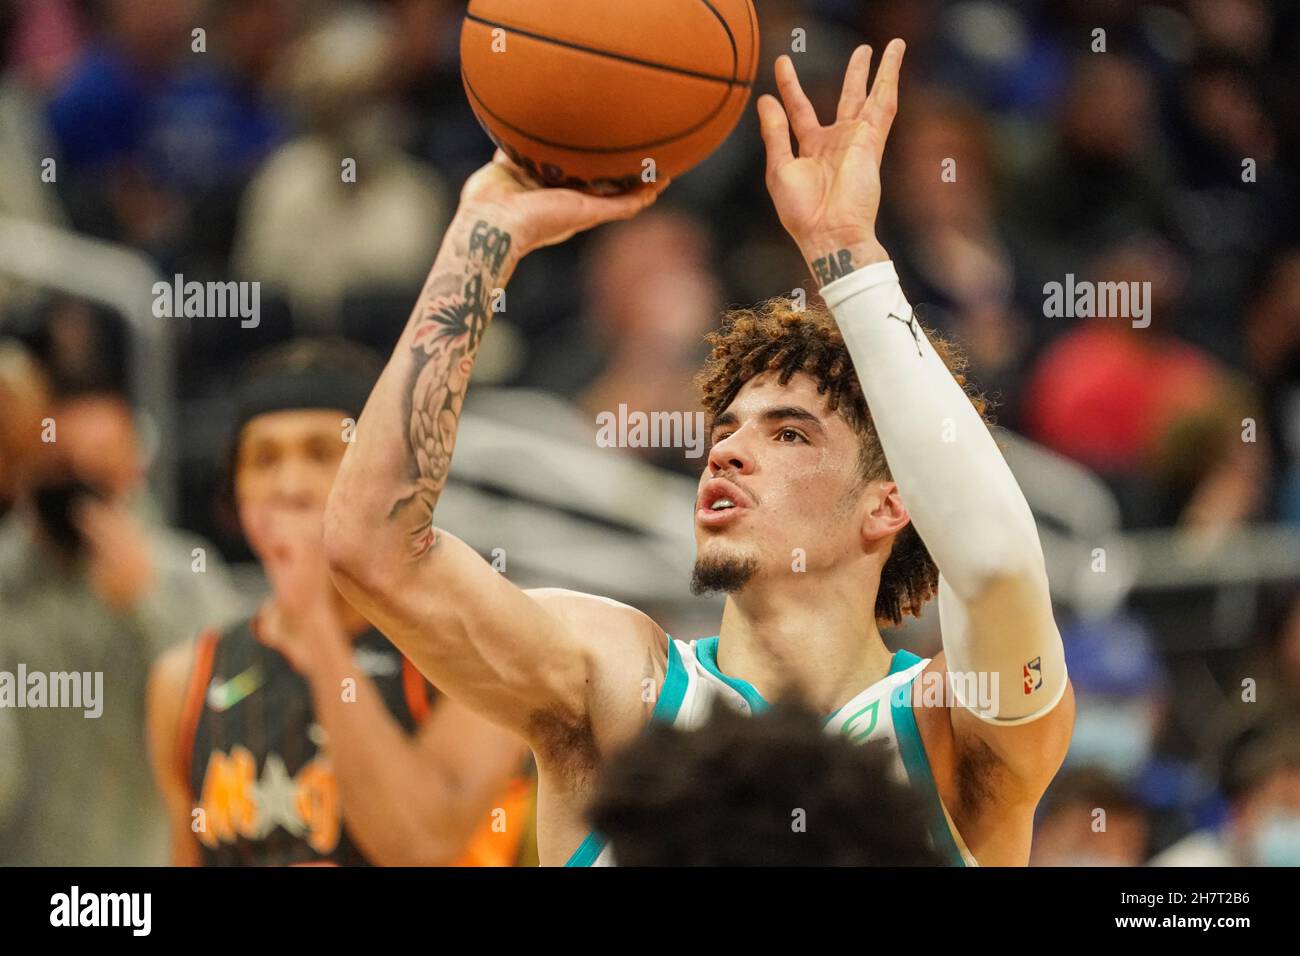 LaMelo Ball 2 After Shoots basketball player for the Charlotte